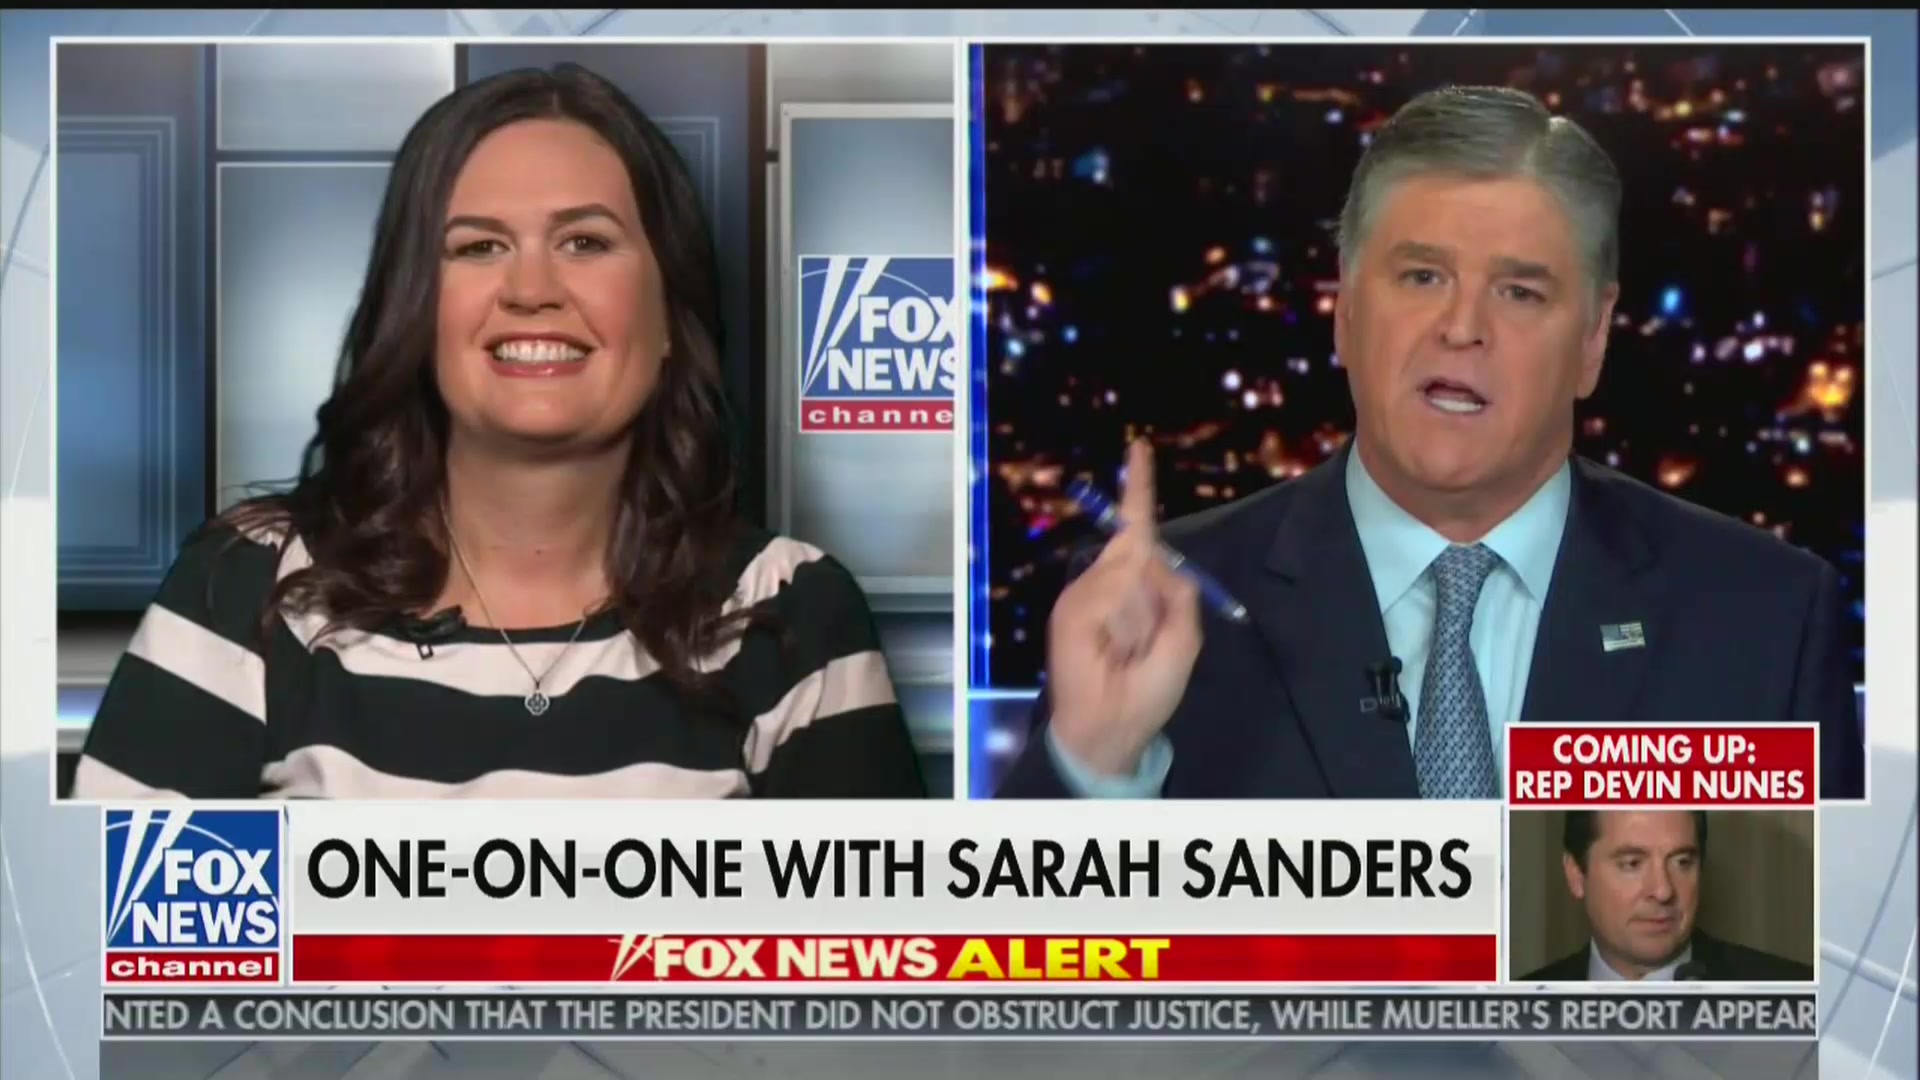 Watch Hannity Walk Sarah Sanders Through Her Excuse for Lying About James Comey